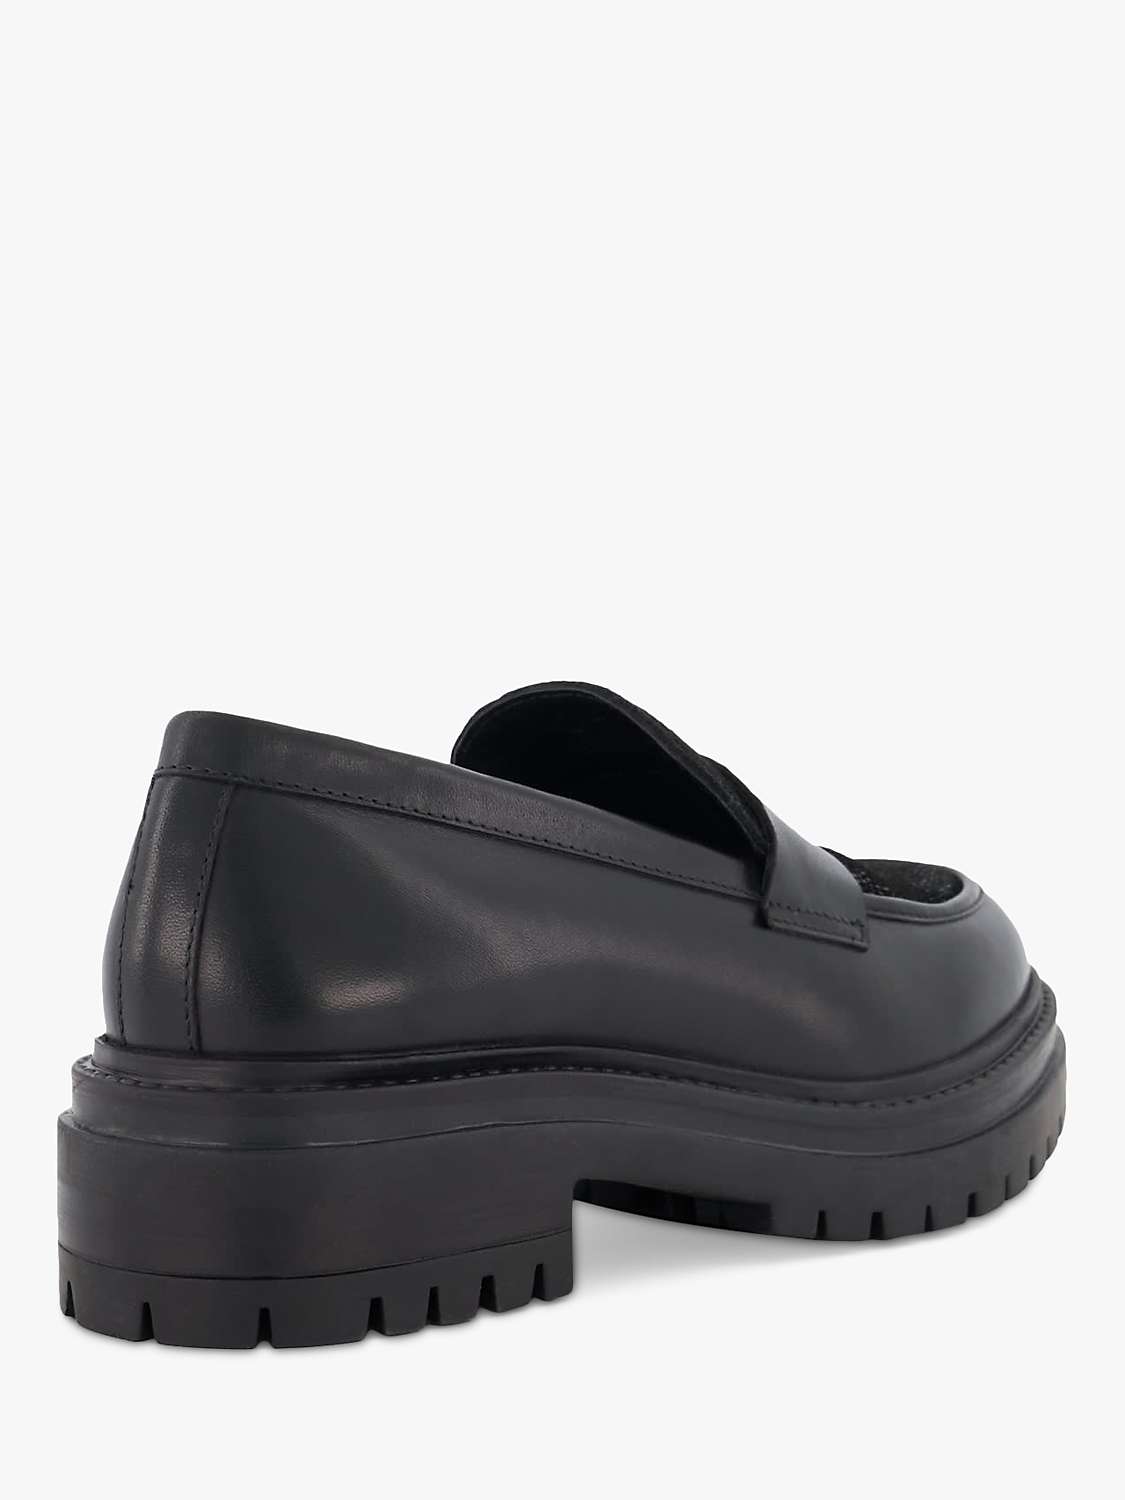 Buy Dune Gaining Leather Loafers, Black Online at johnlewis.com